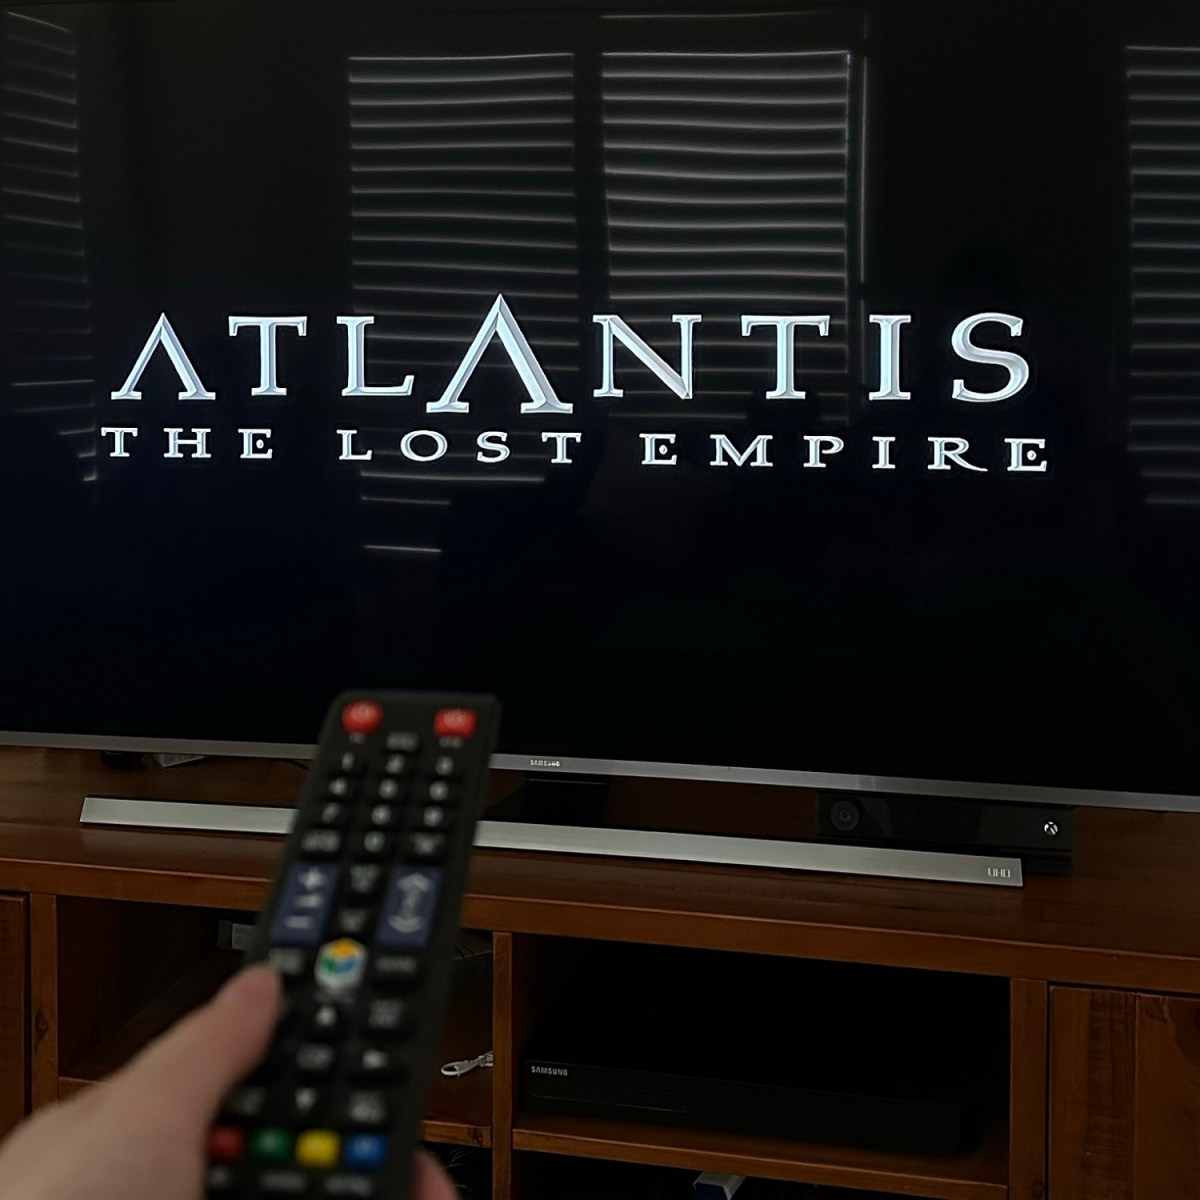 Title screen on TV saying Atlantis The Lost Empire. TV remote is pointed at the screen.